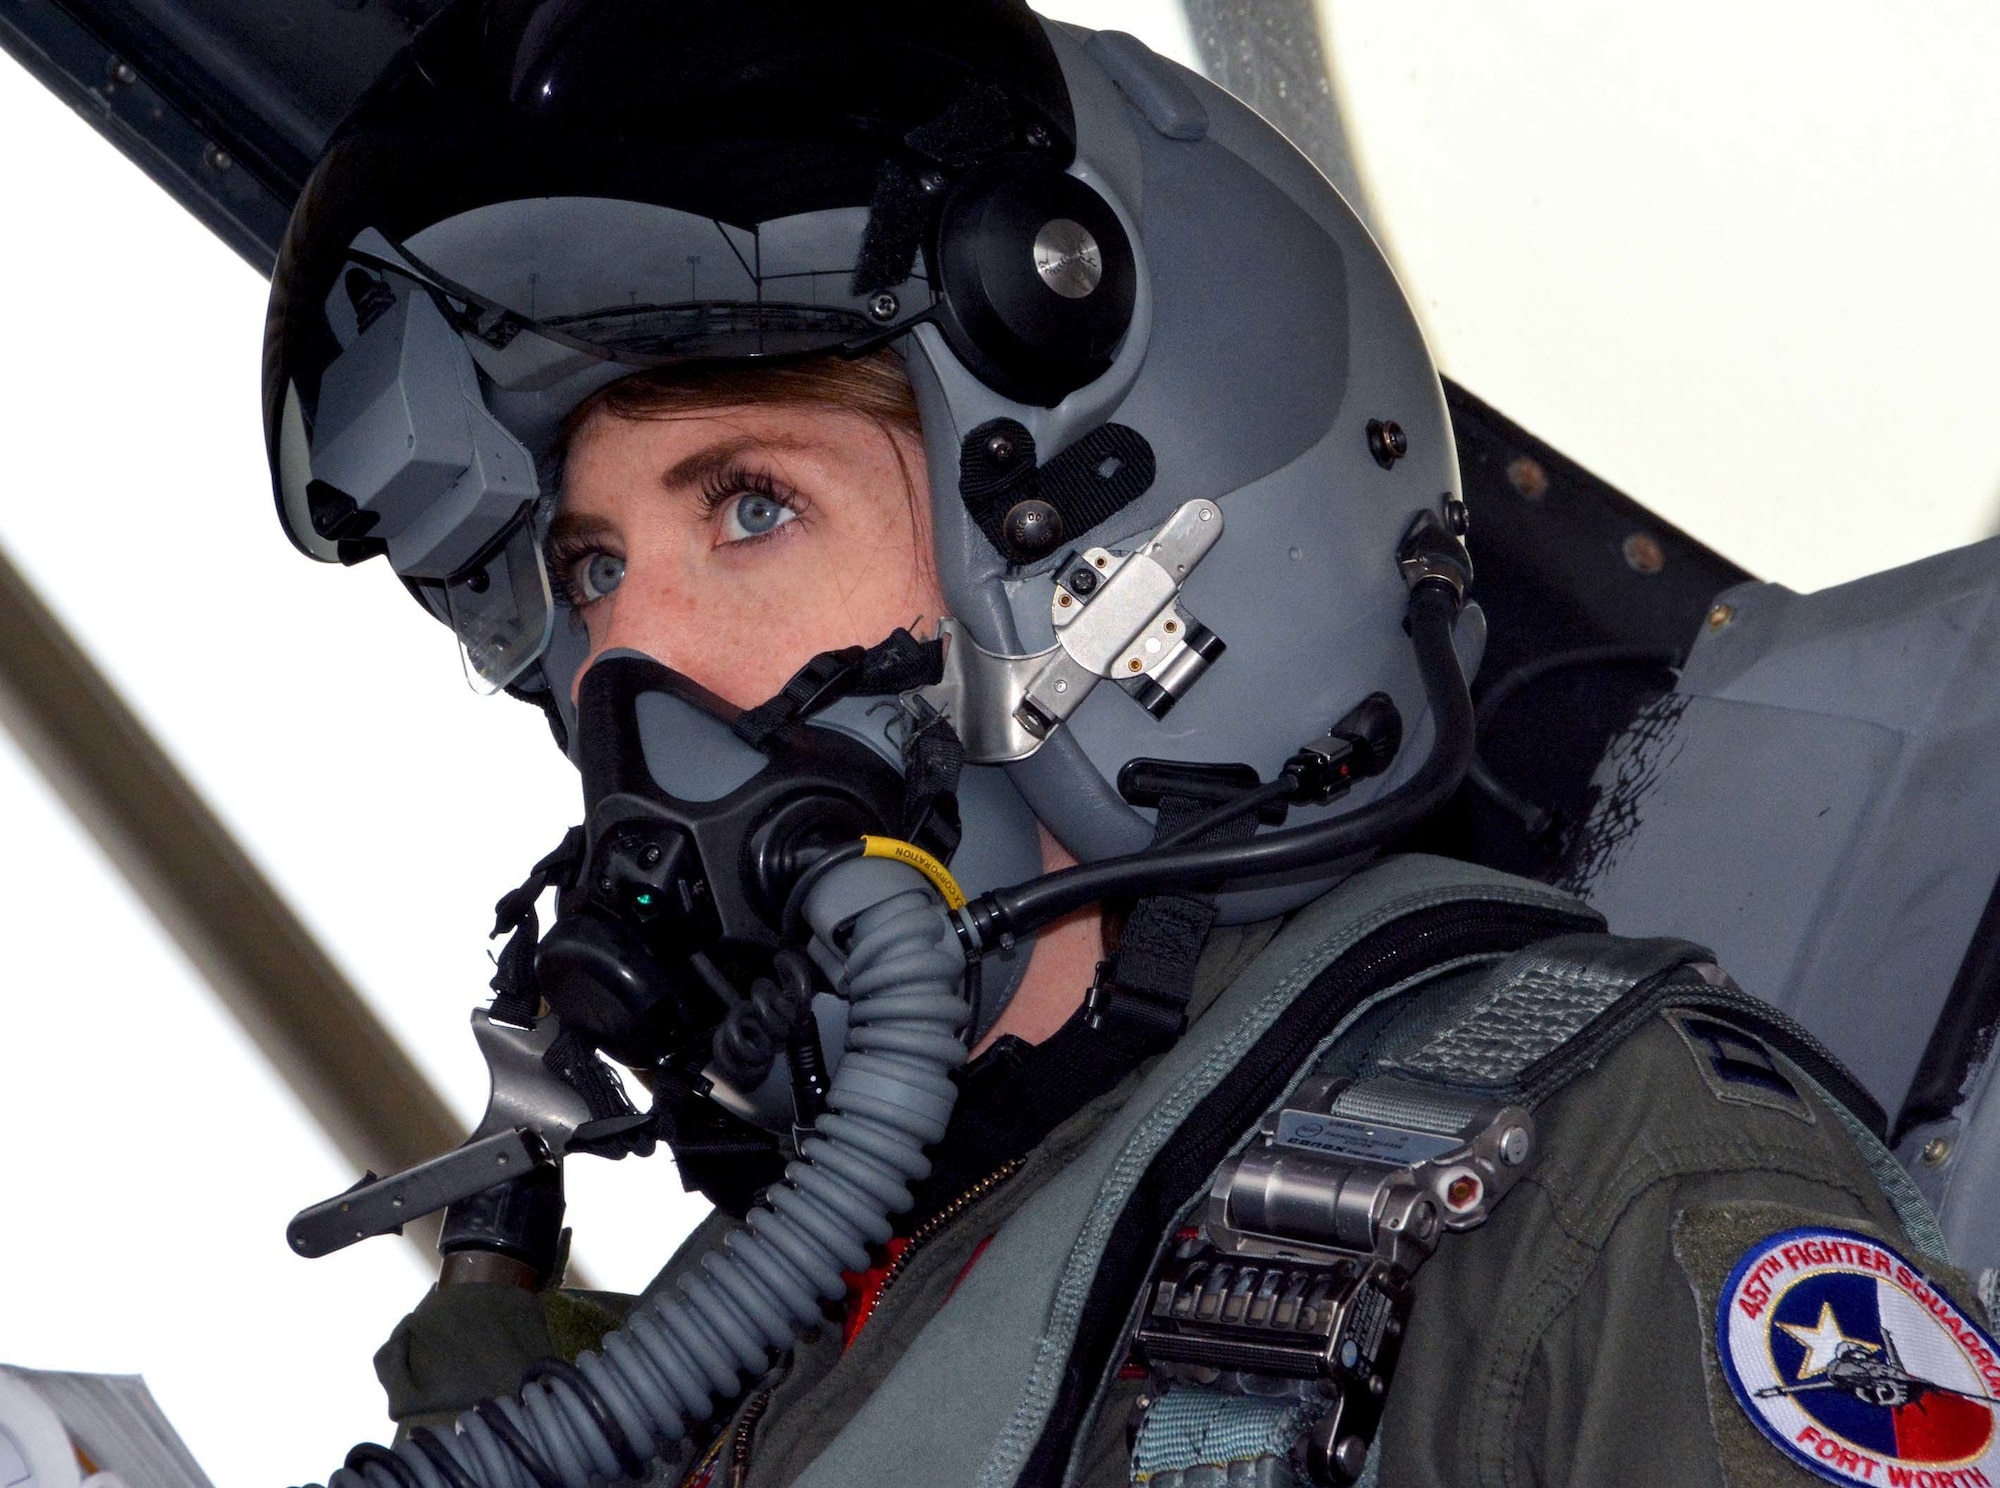 Capt. Michelle “Mace” Curran, 355th Fighter Squadron F-16 pilot, looks up during launch preparations on the flightline, March 4, 2017. Curran was the first woman assigned to fly in the squadron and attributed her success to her parents, leadership and strong women in aviation past and present who’ve helped pave the way. (U.S. Air Force photo by Staff Sgt. Samantha Mathison)